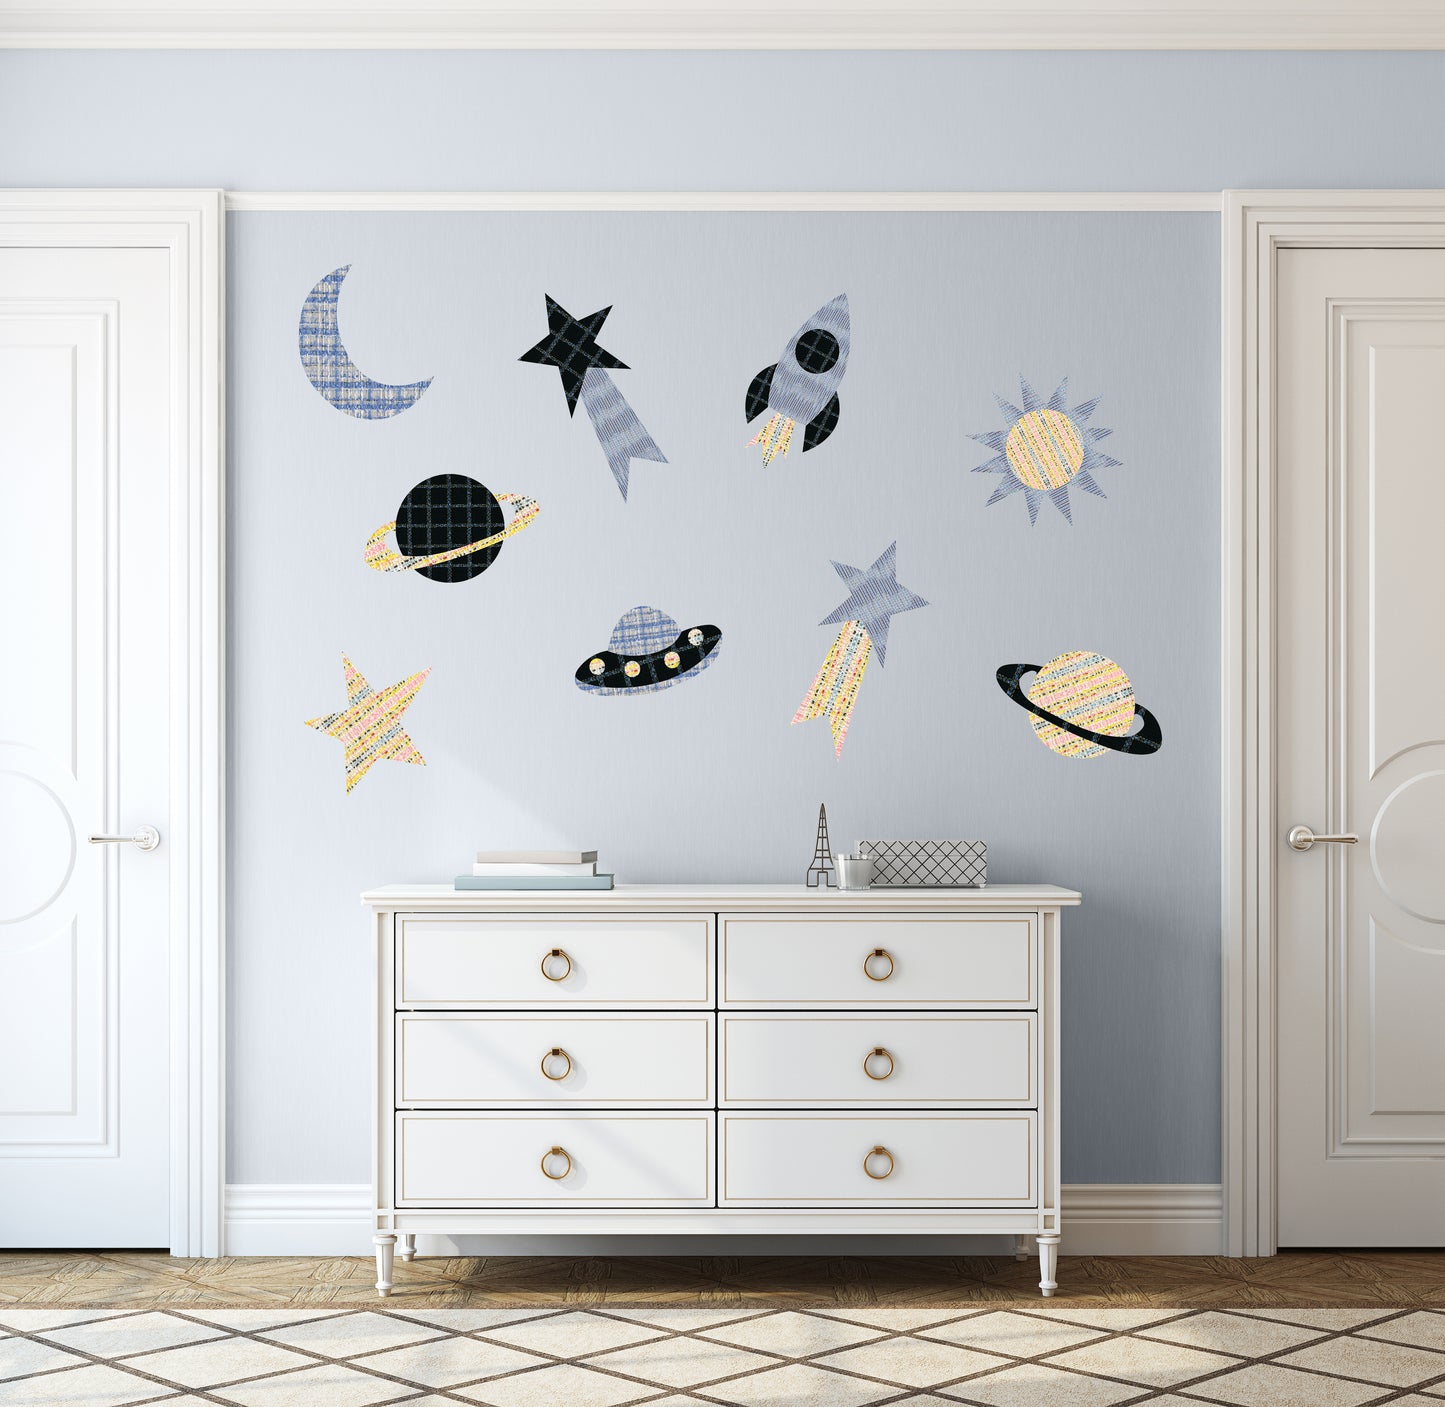 Space Wall Decal Set